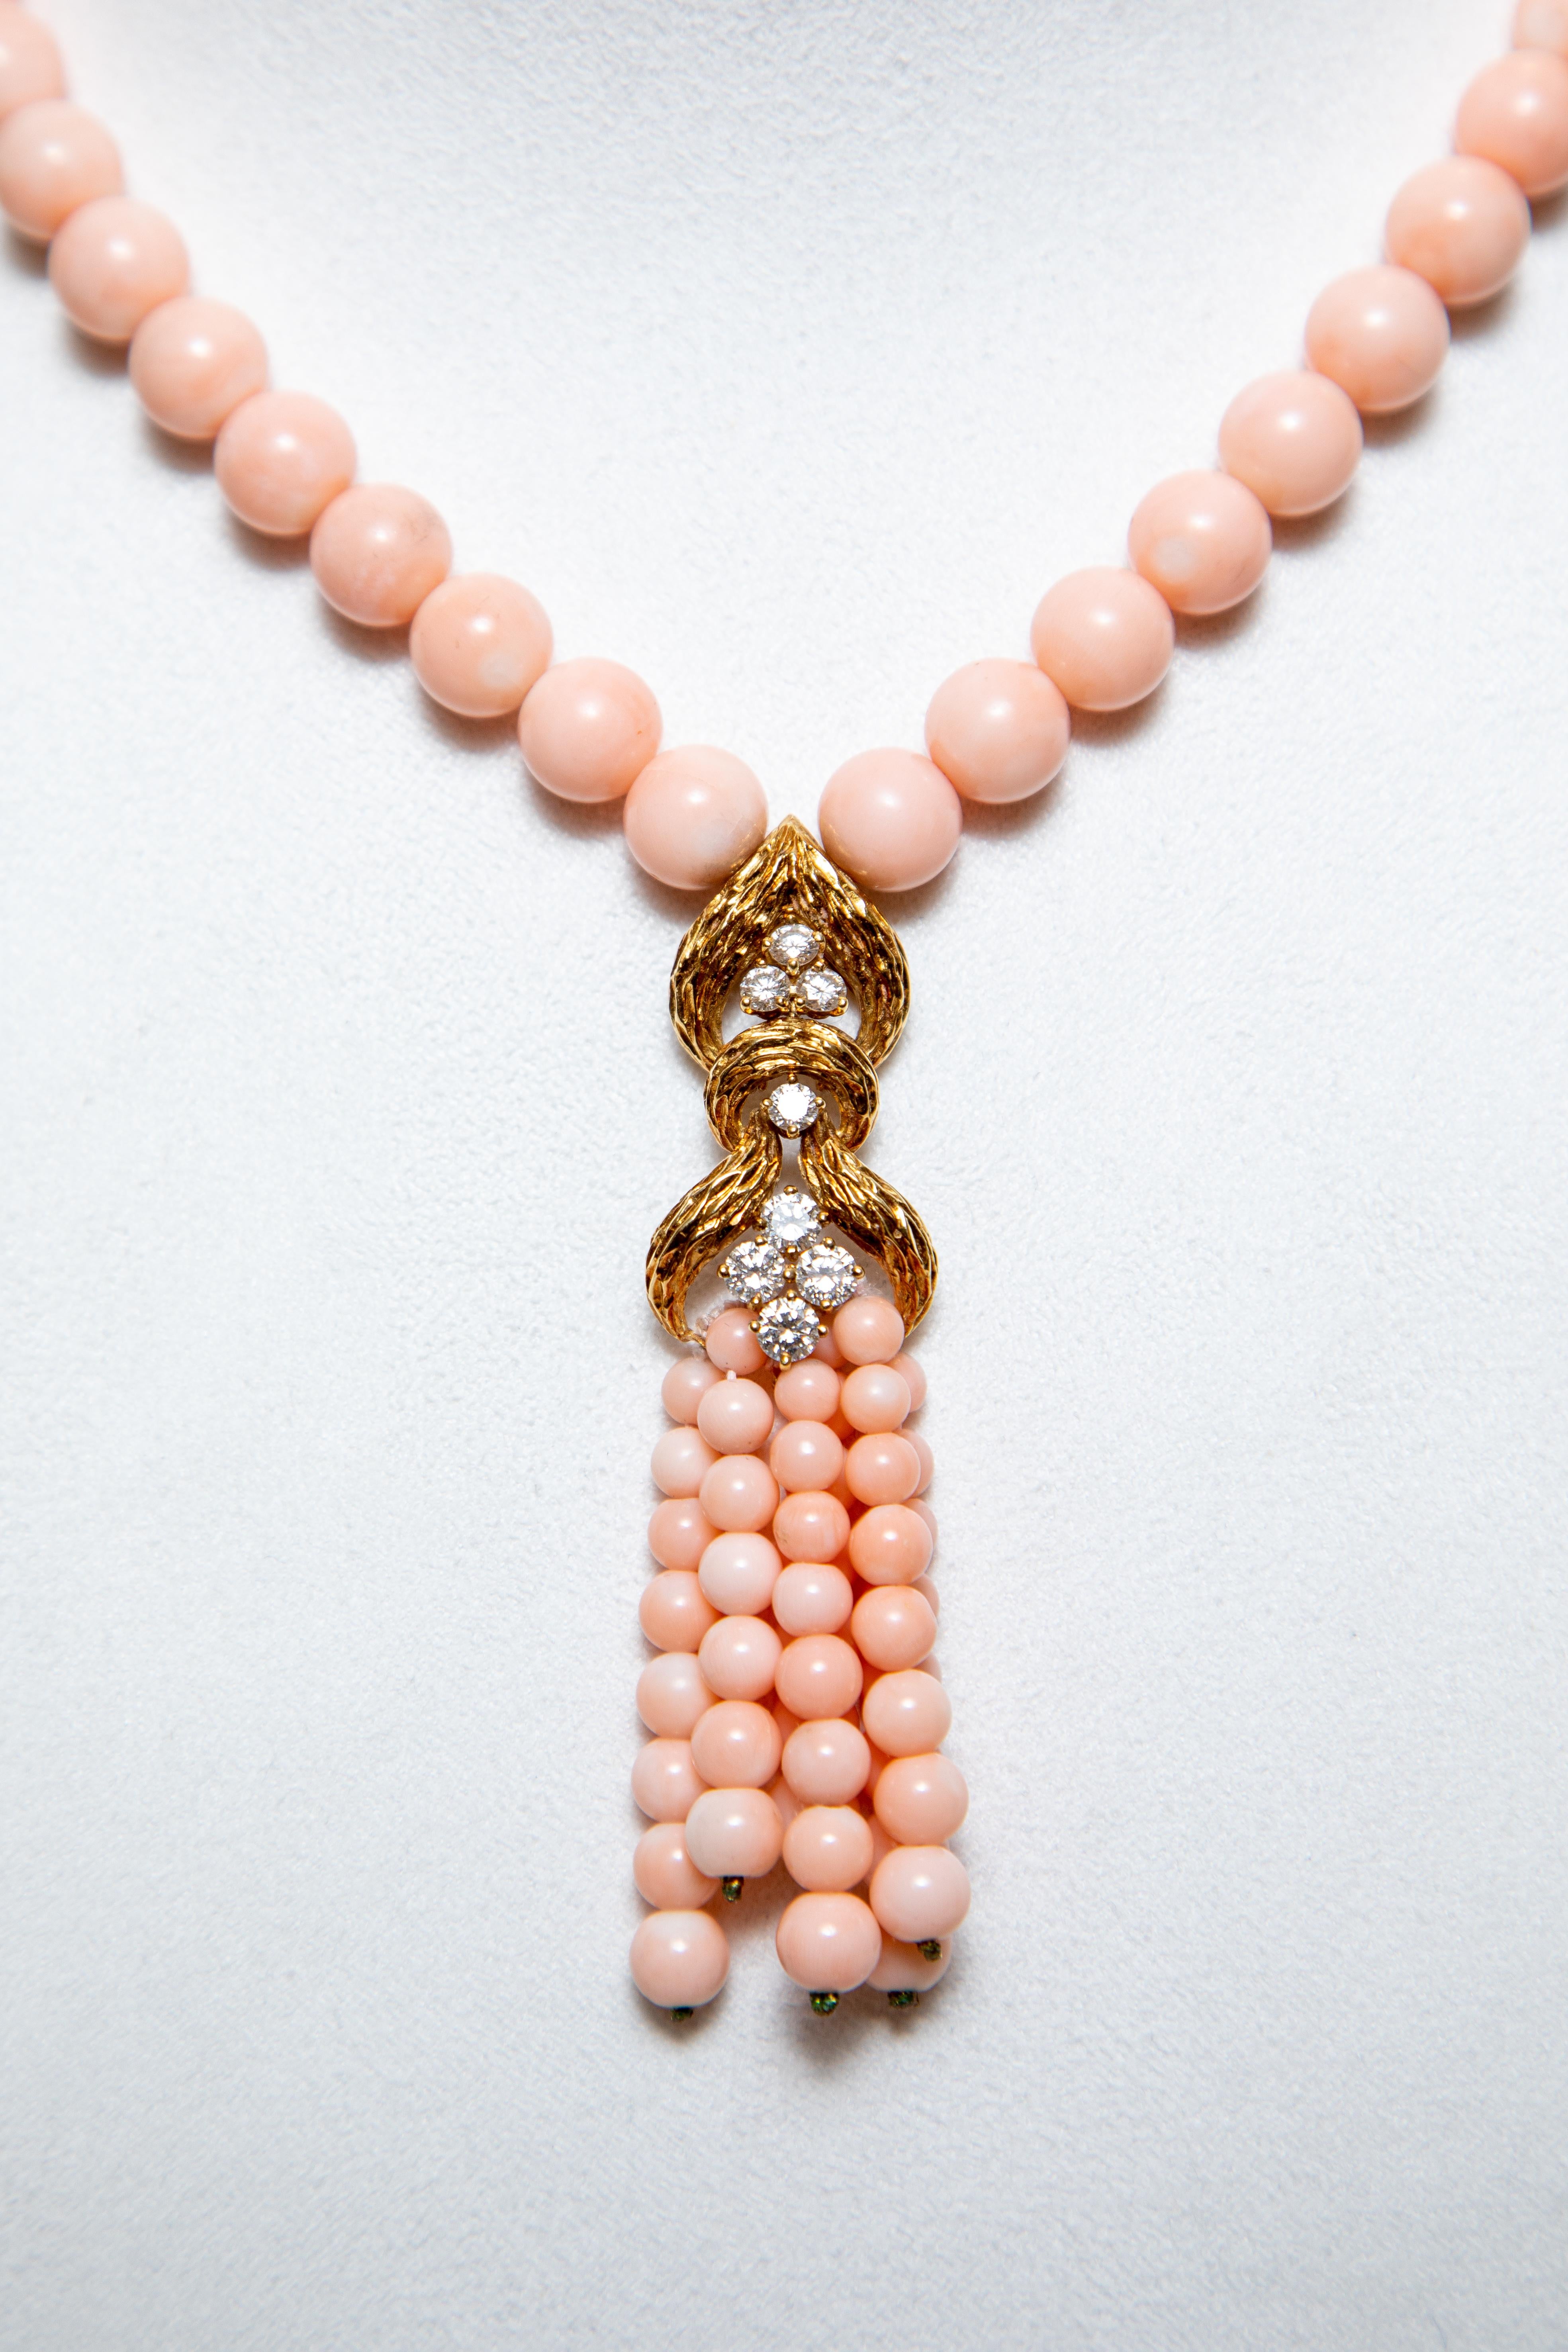 Round Cut Coral, Diamond and 18k Yellow Gold Necklace, by M. Gérard For Sale